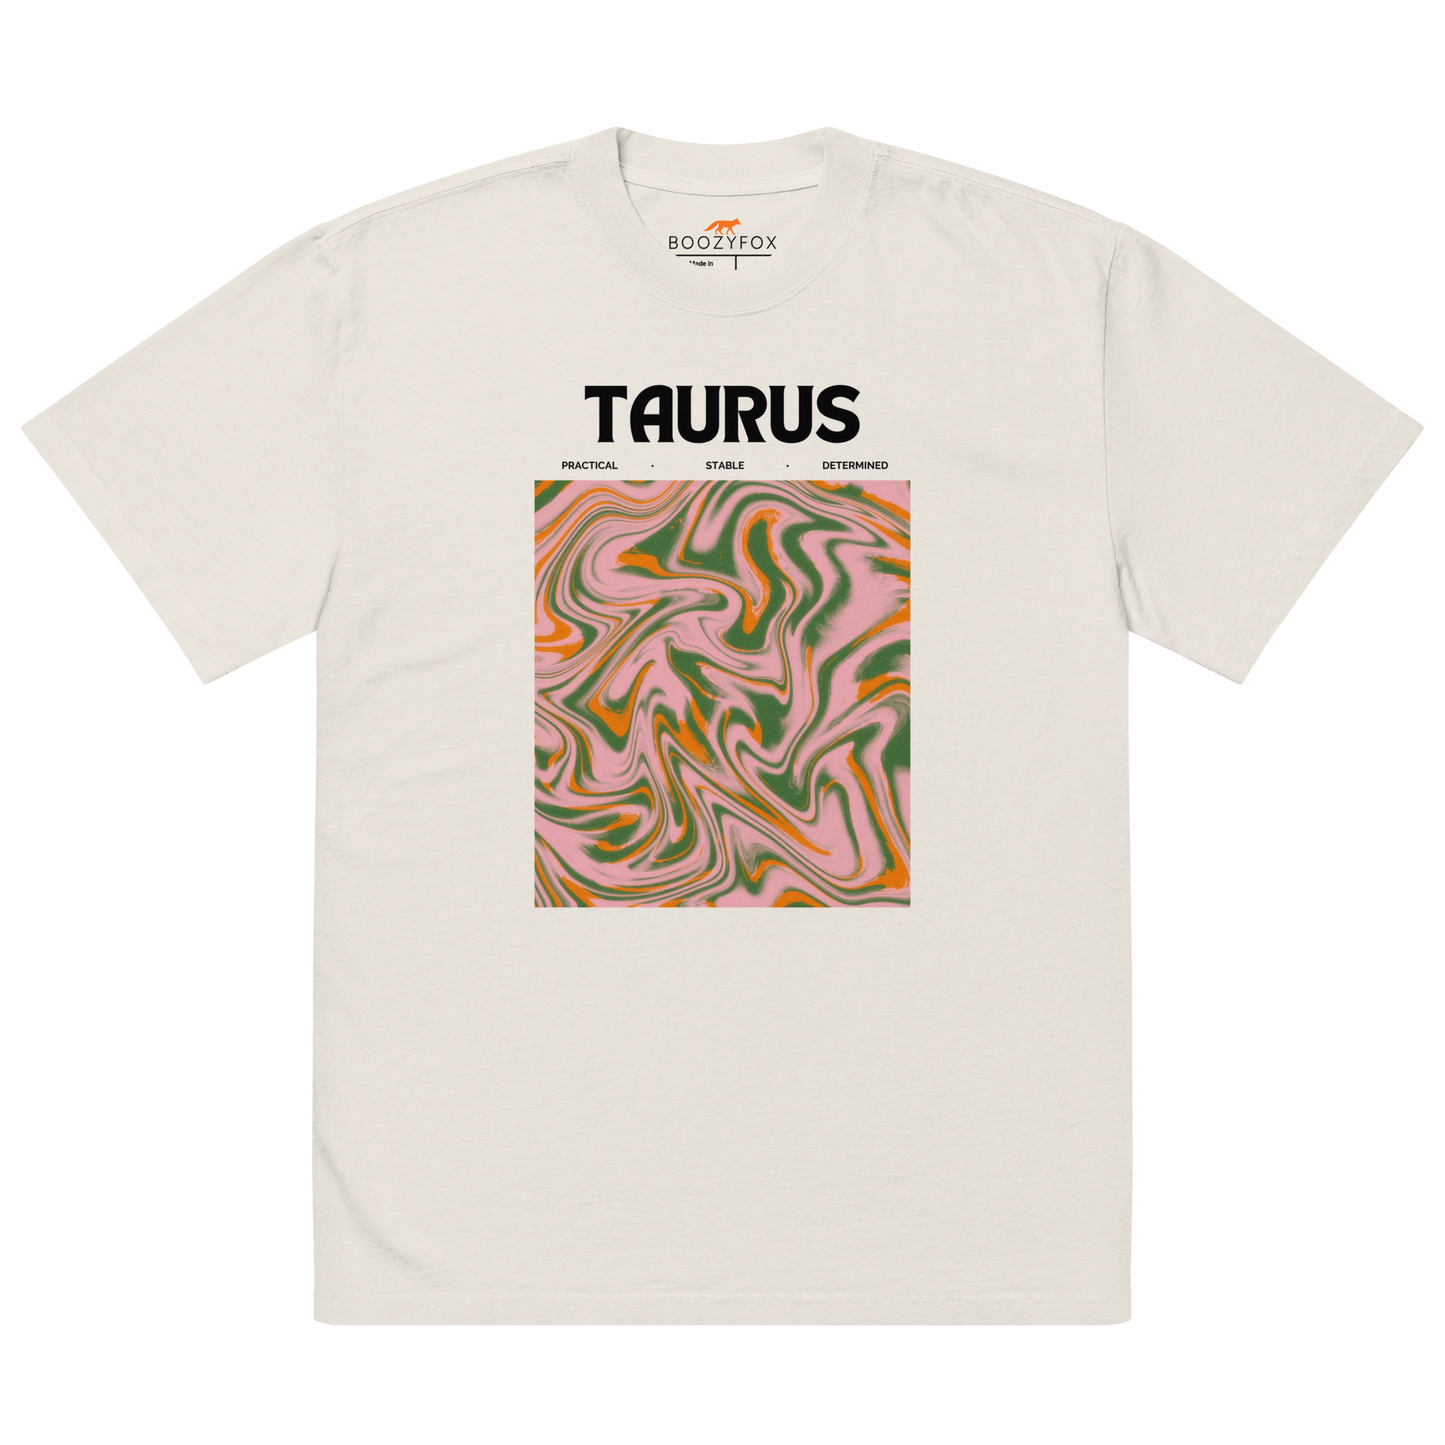 Faded Bone Taurus Oversized T-Shirt featuring an Abstract Taurus Star Sign graphic on the chest - Cool Graphic Zodiac Oversized Tees - Boozy Fox